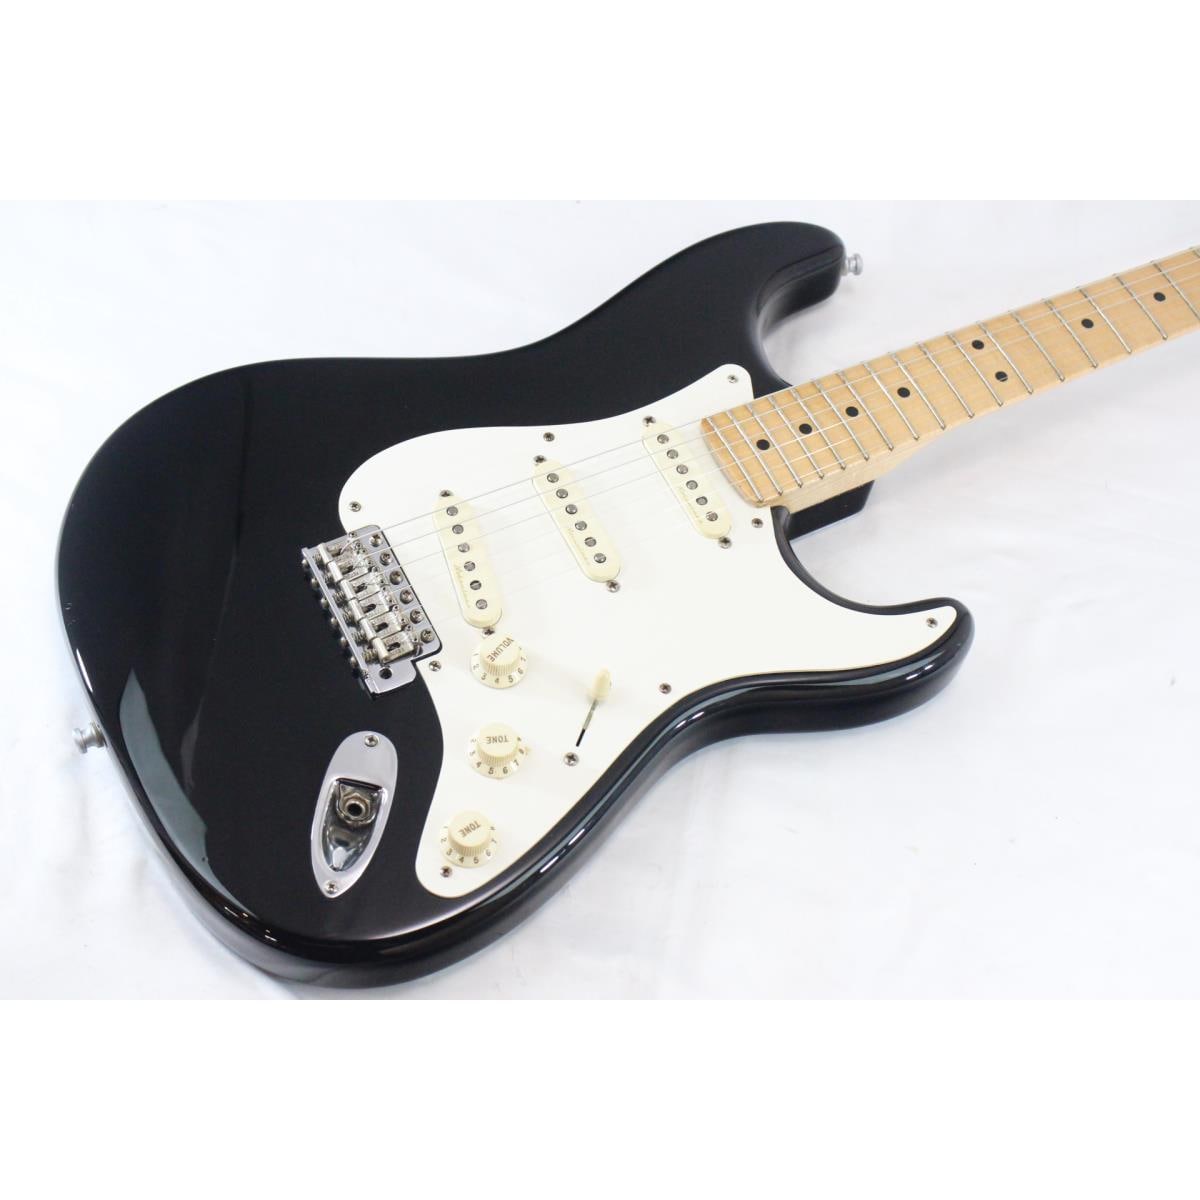 FENDER CUSTOM SHOP MBS Eric Clapton Stratocaster by T．Krause